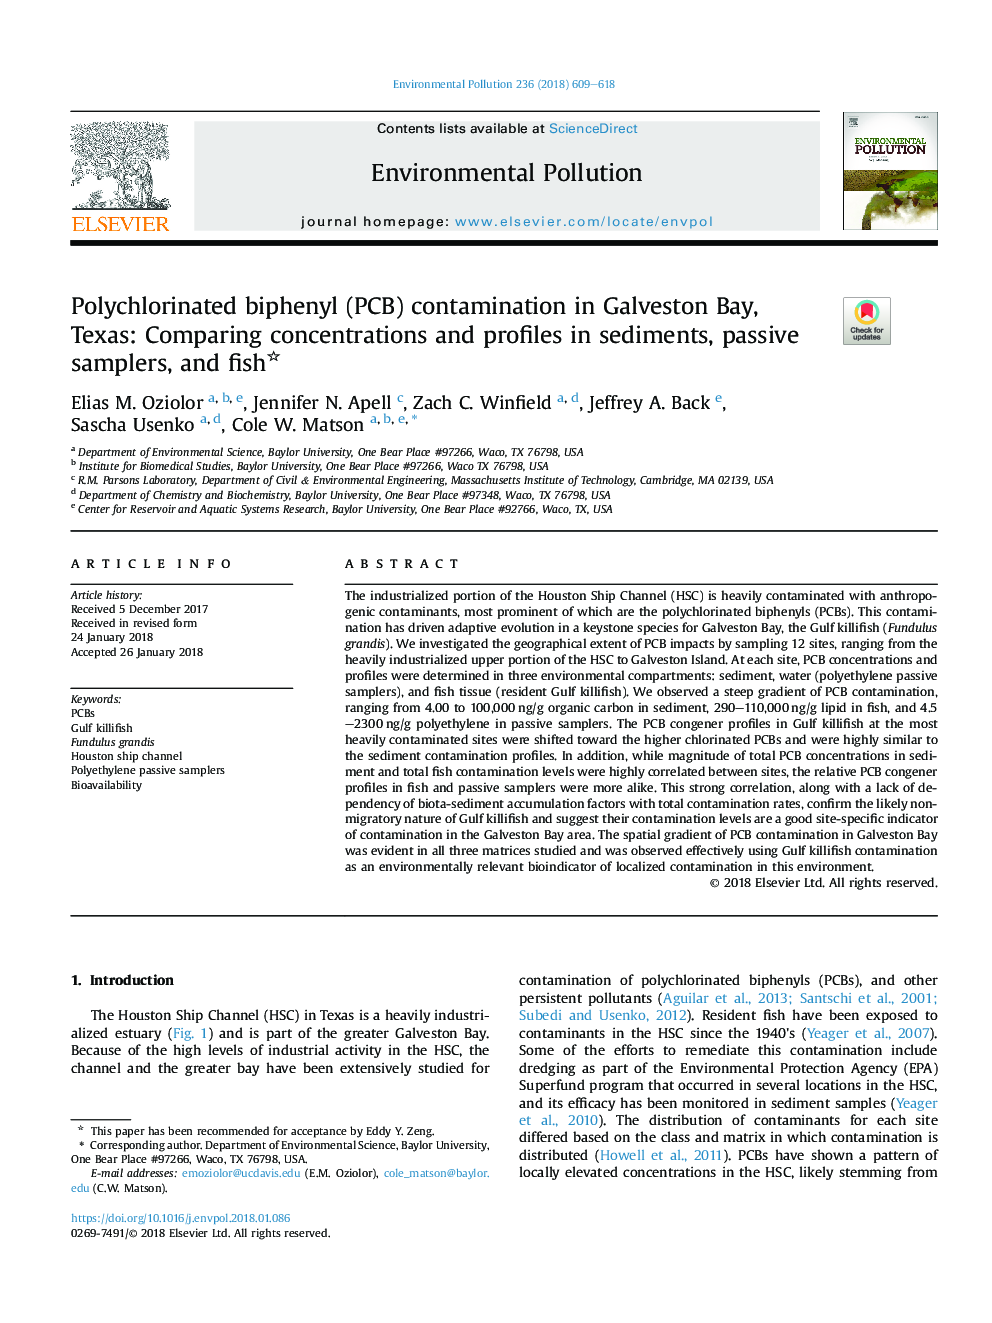 Polychlorinated biphenyl (PCB) contamination in Galveston Bay, Texas: Comparing concentrations and profiles in sediments, passive samplers, and fish